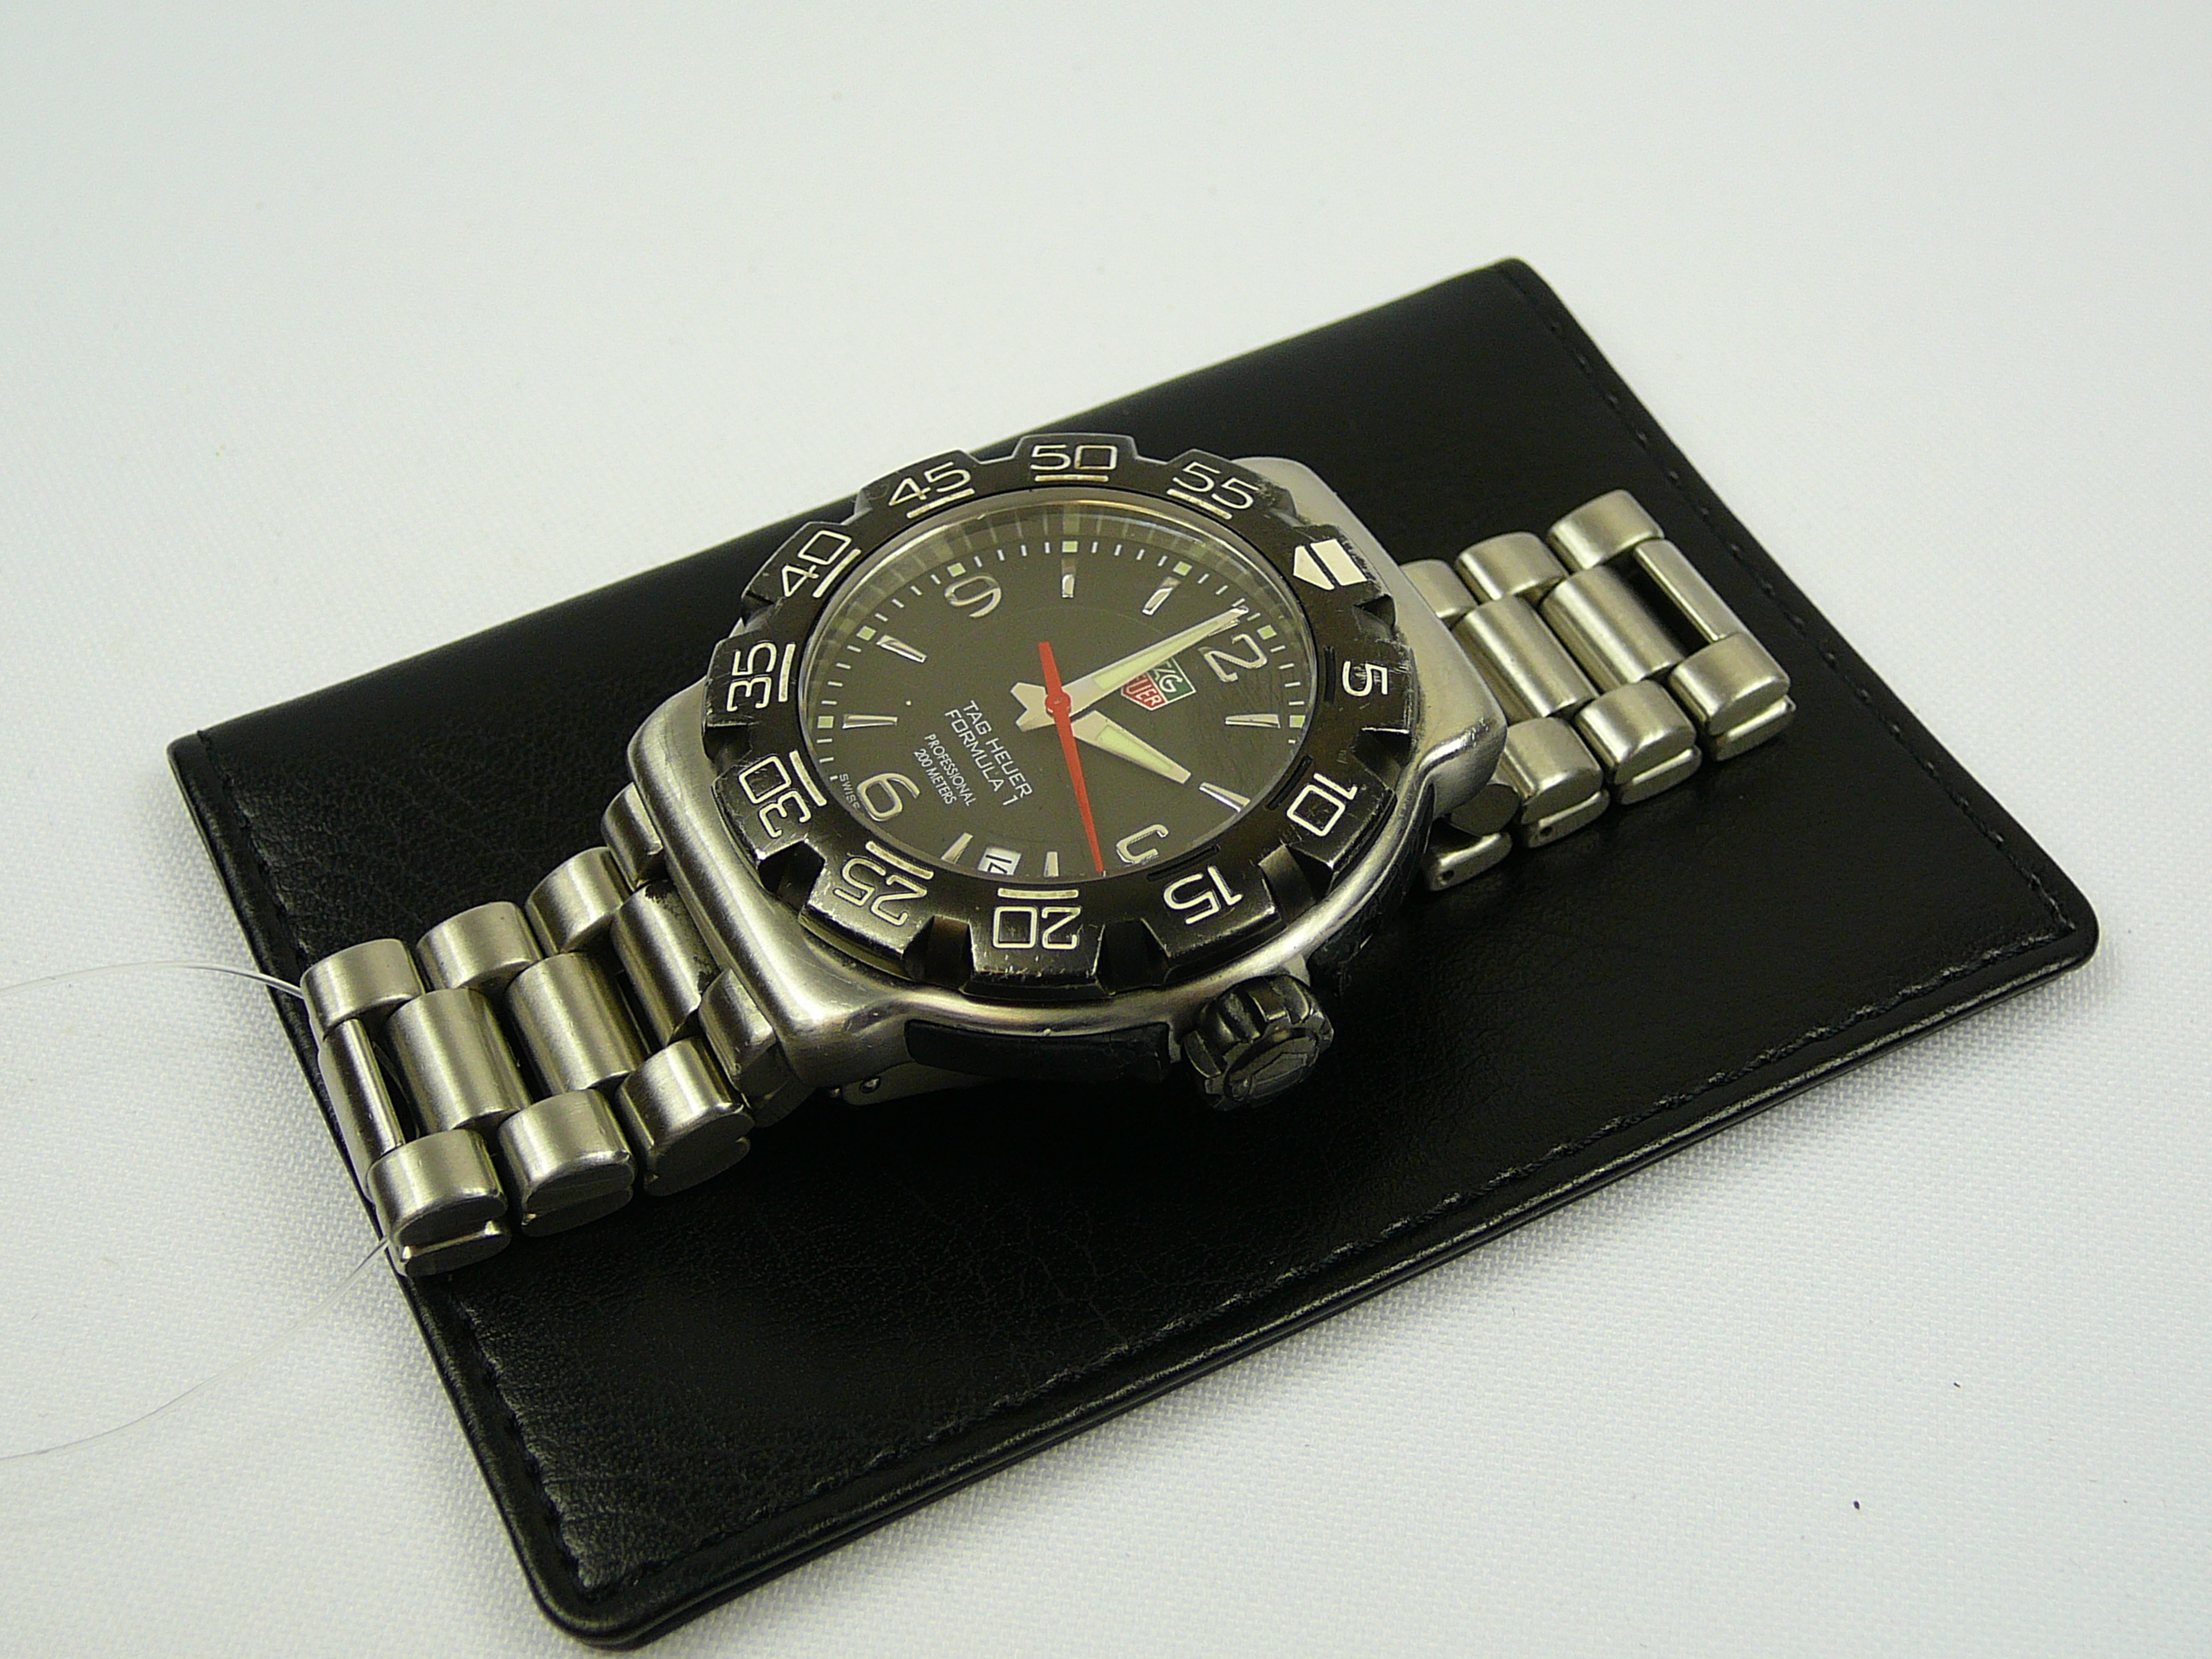 Gents Tag Heuer wrist watch - Image 3 of 5